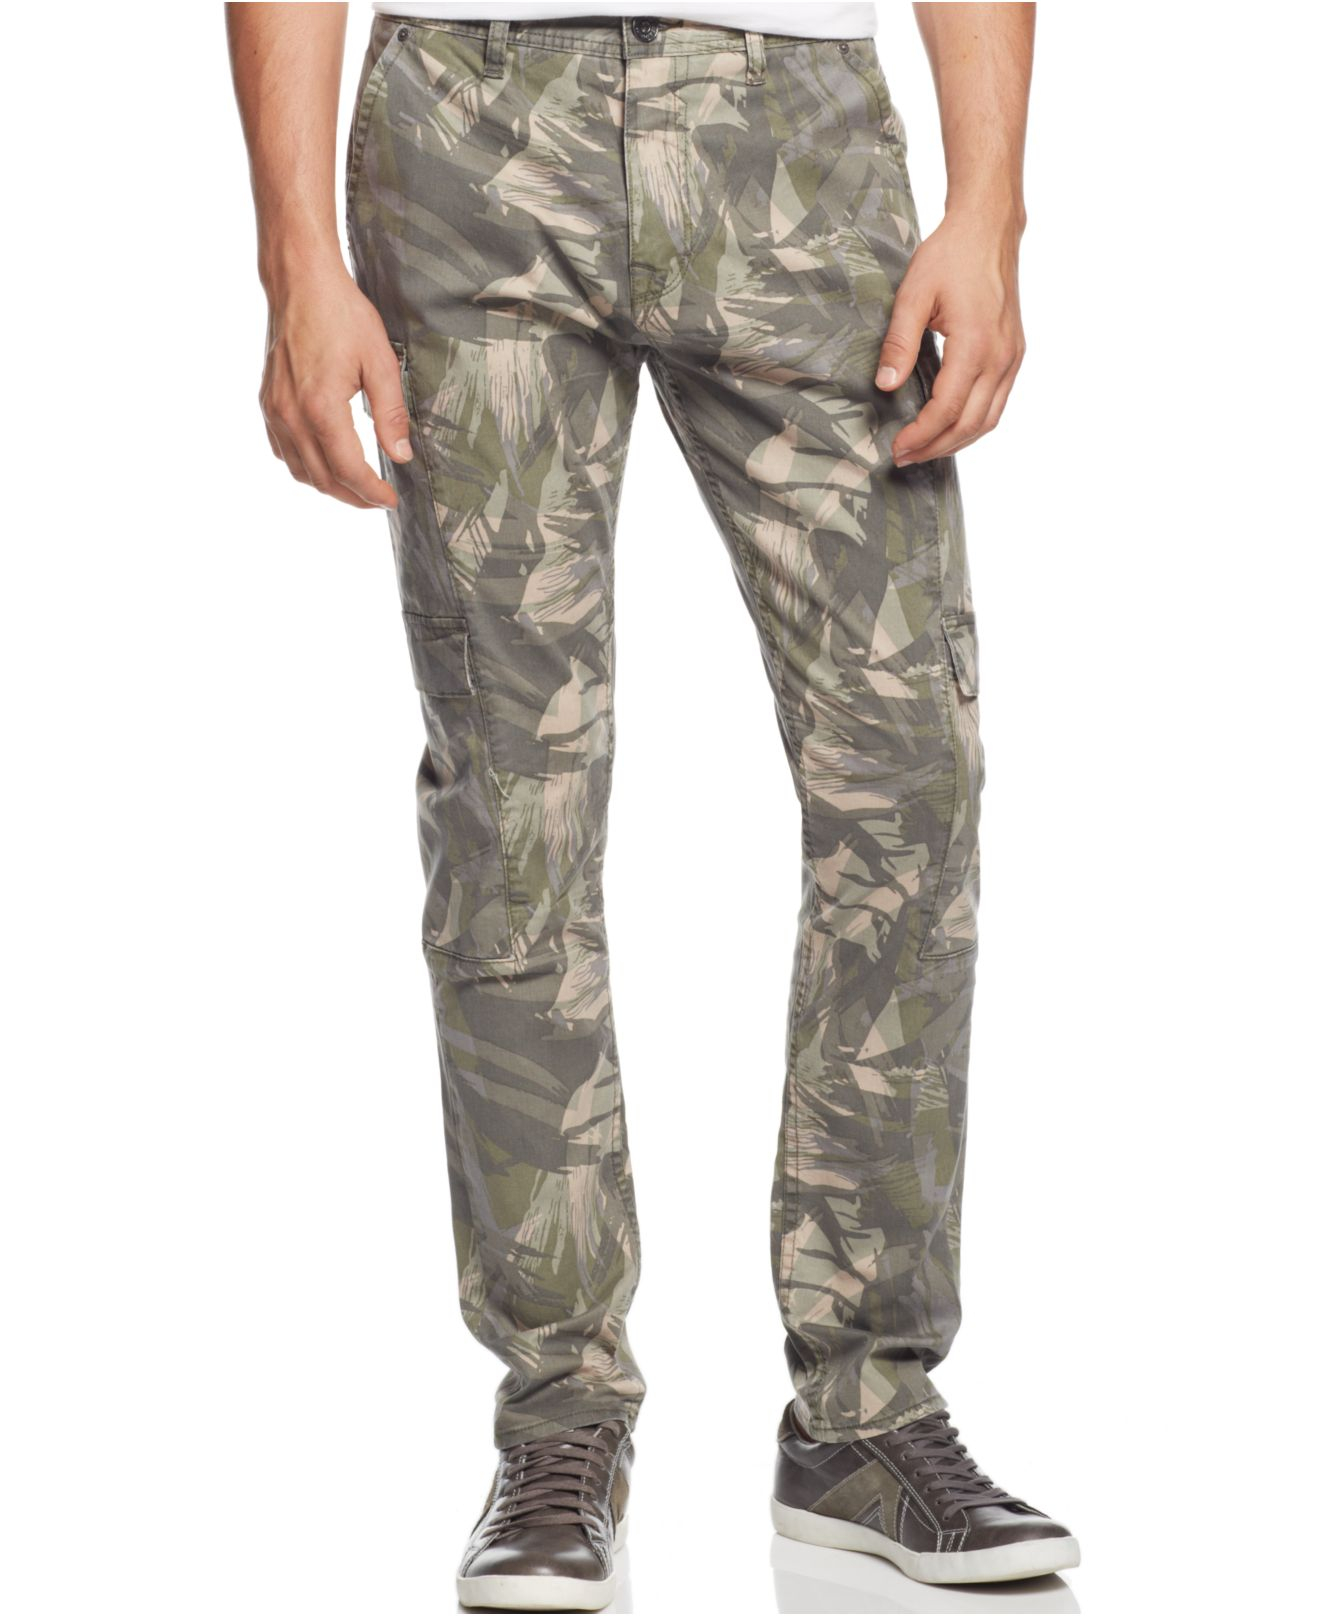 Lyst - Guess Sunset Heights Camo Cargo Pants in Green for Men